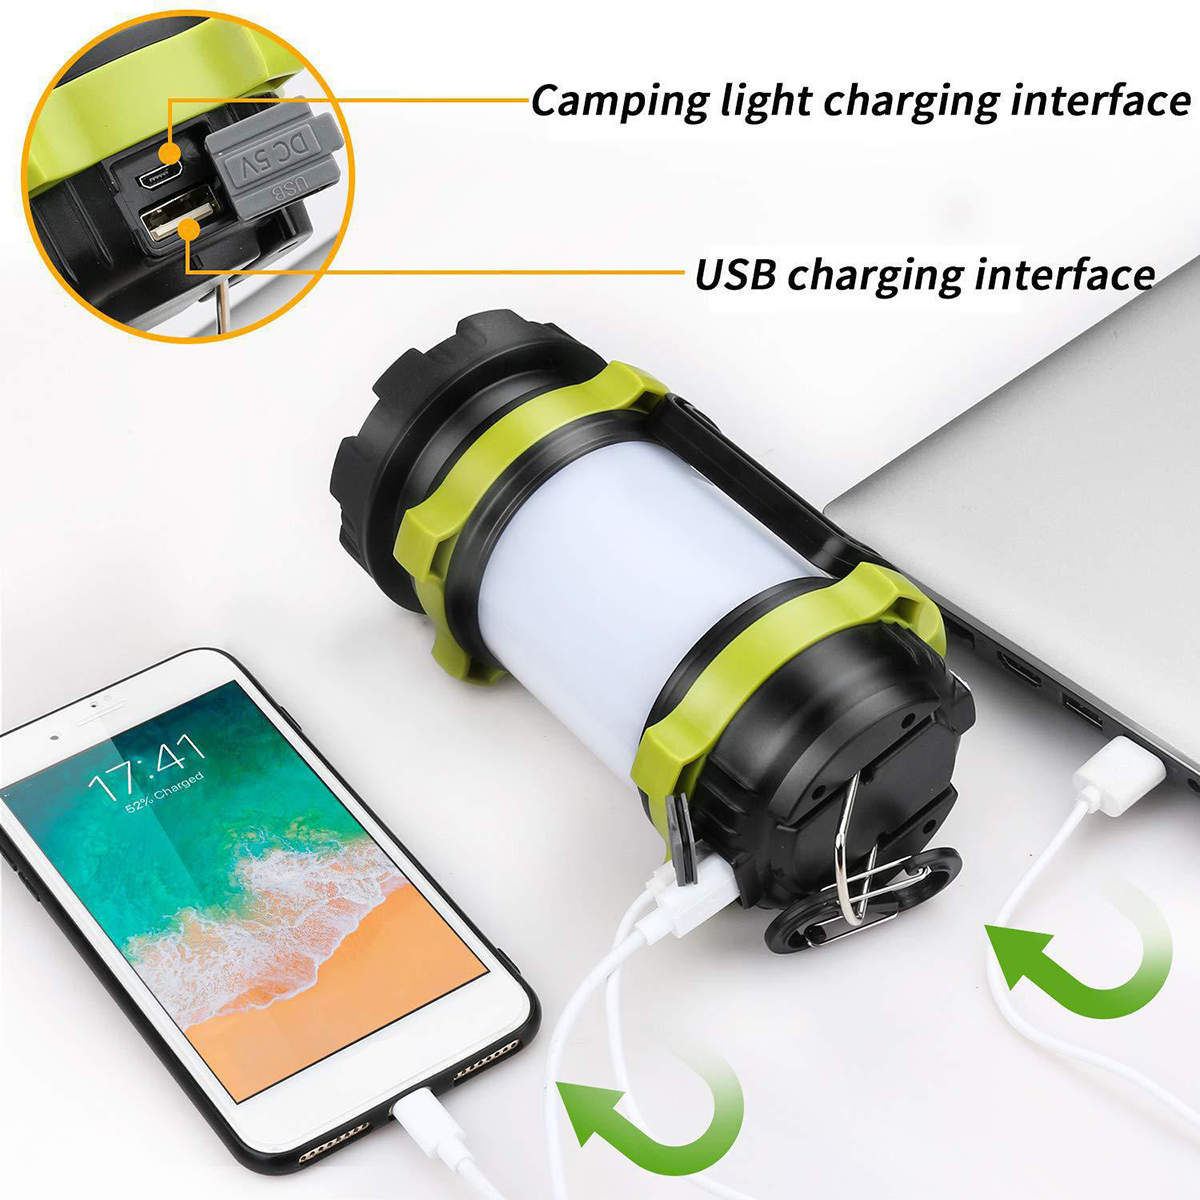 LED-Flashlight-Camping-Light-Torch-Lantern-USB-Rechargeable-USB-Charger-Worklight-Waterproof-1612111-7